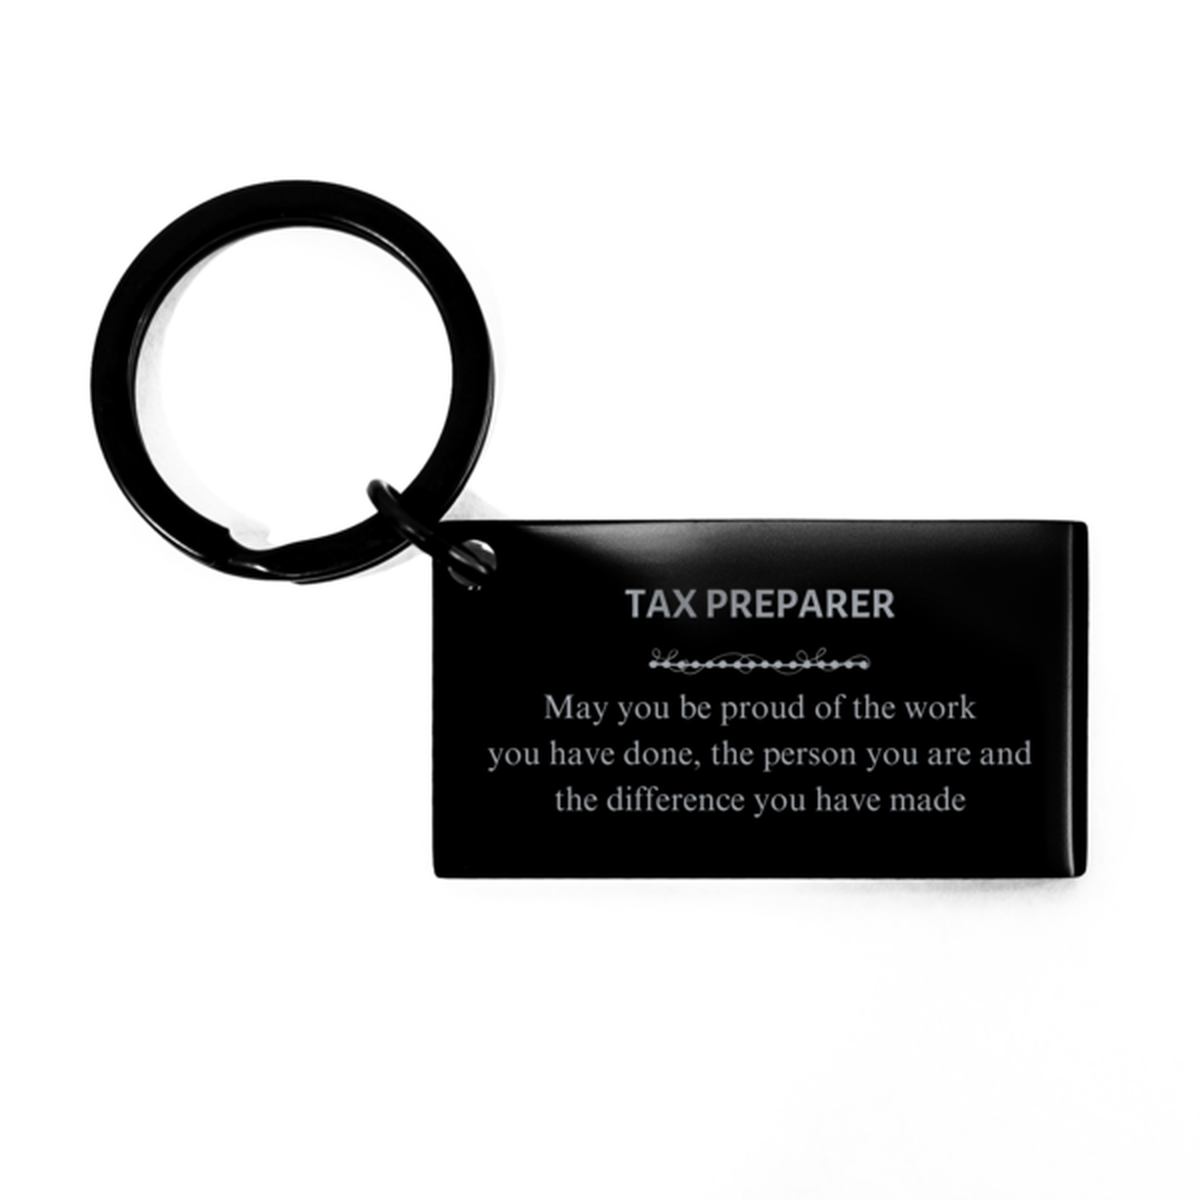 Woodworker May you be proud of the work you have done, Retirement Tax Preparer Keychain for Colleague Appreciation Gifts Amazing for Tax Preparer